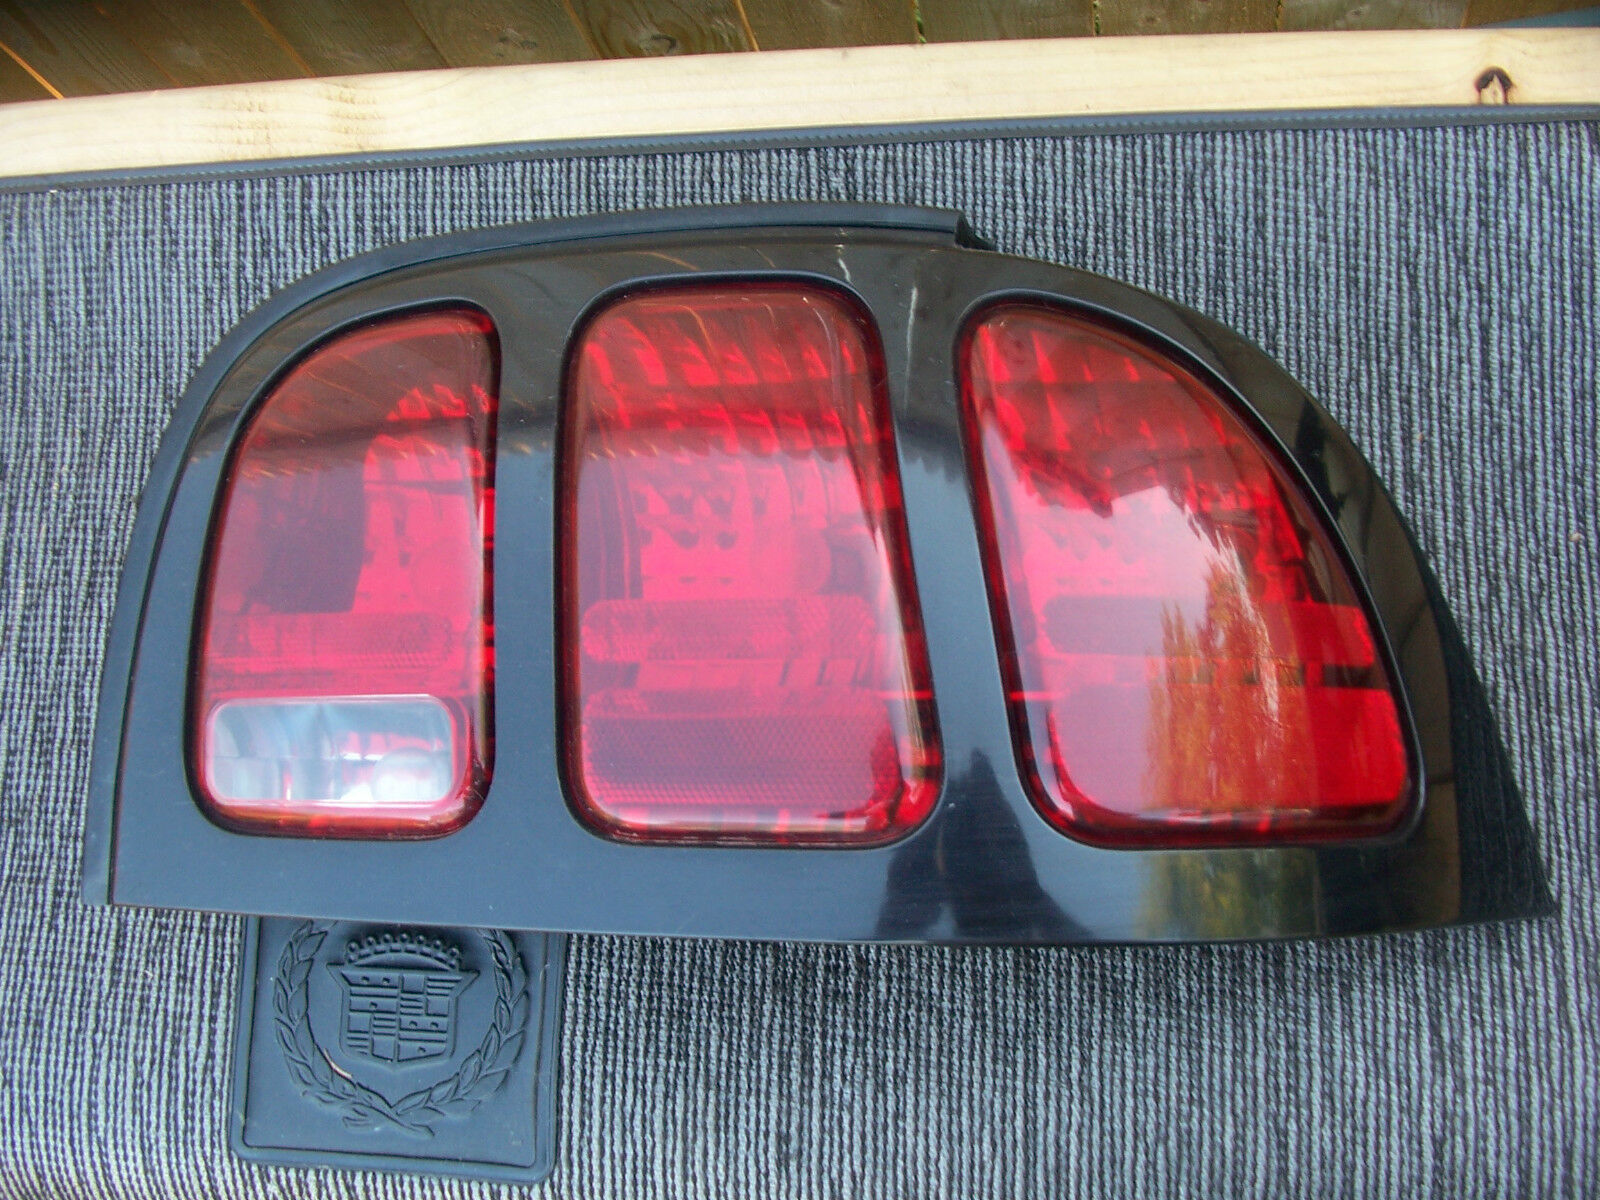 1998 MUSTANG GREEN RIGHT TAILLIGHT OEM USED ORIGINAL FORD PART 1997 1996 1995 94 - $178.19